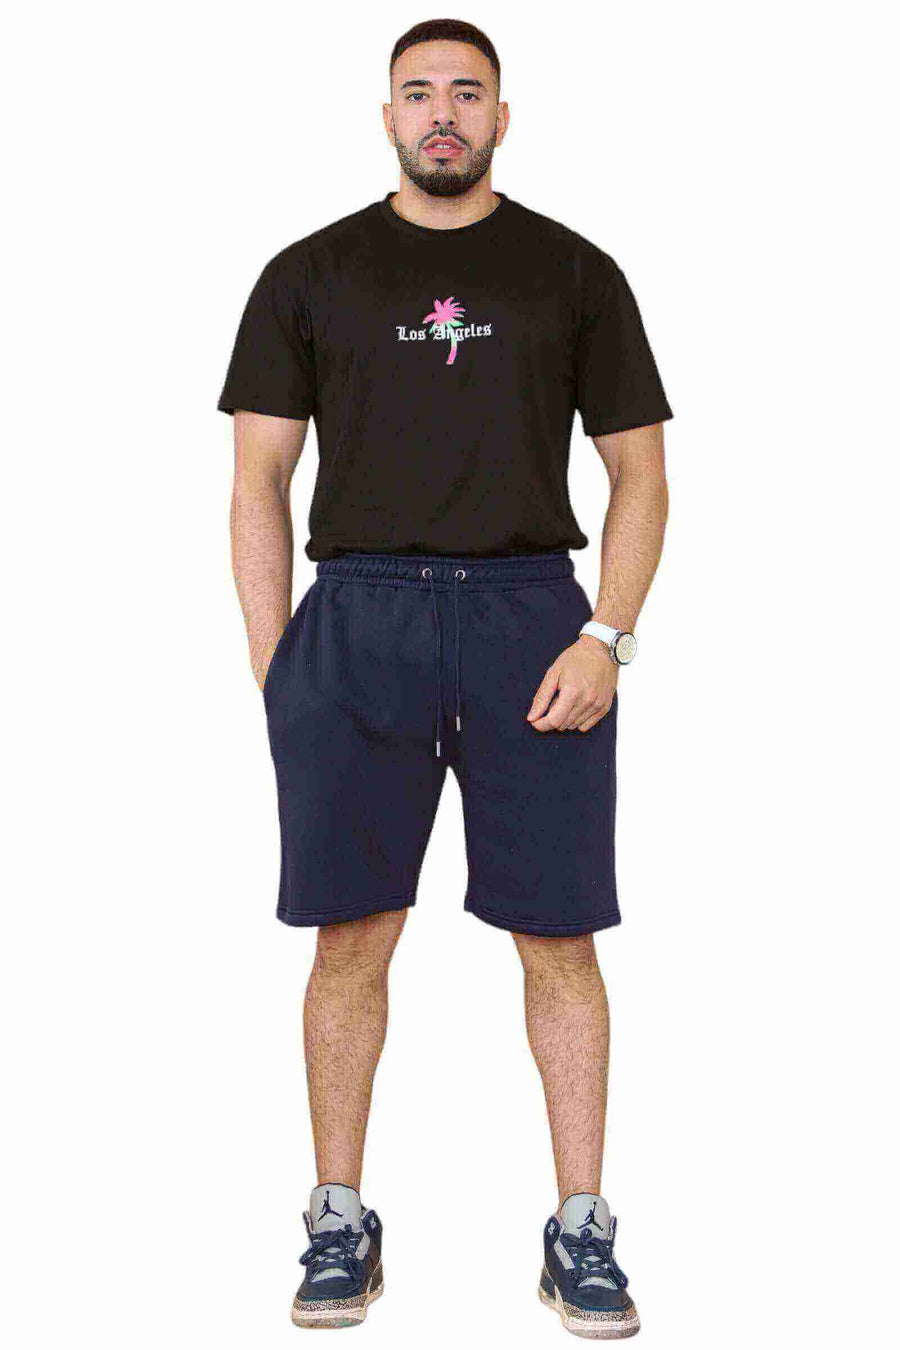 Front Pose of Men's Gym Shorts in Navy Blue for Your Active Lifestyle